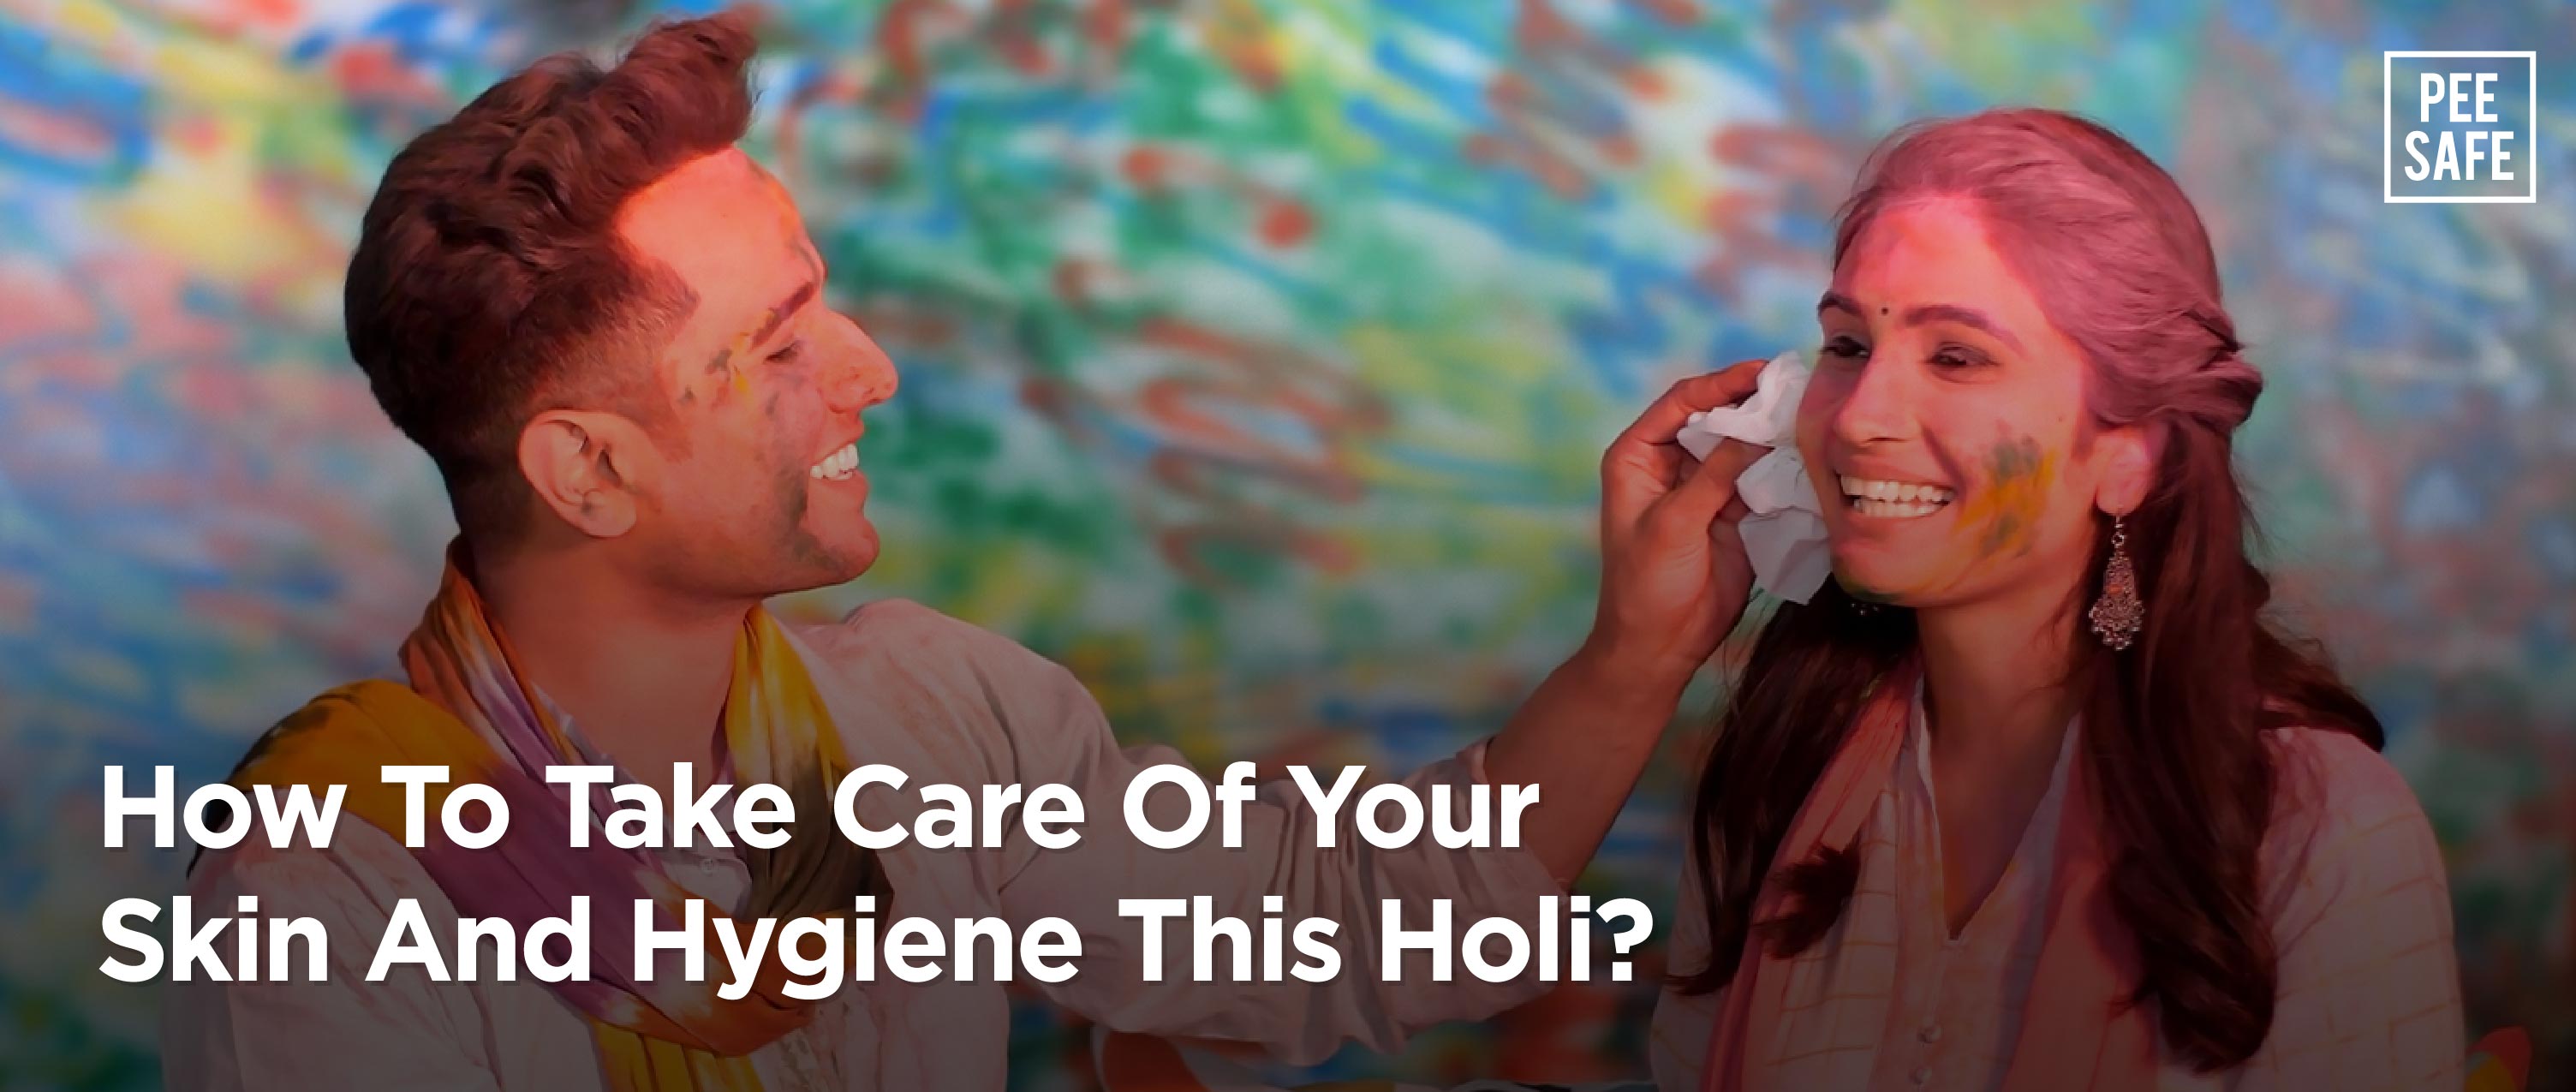 How To Take Care Of Your Skin And Hygiene This Holi?